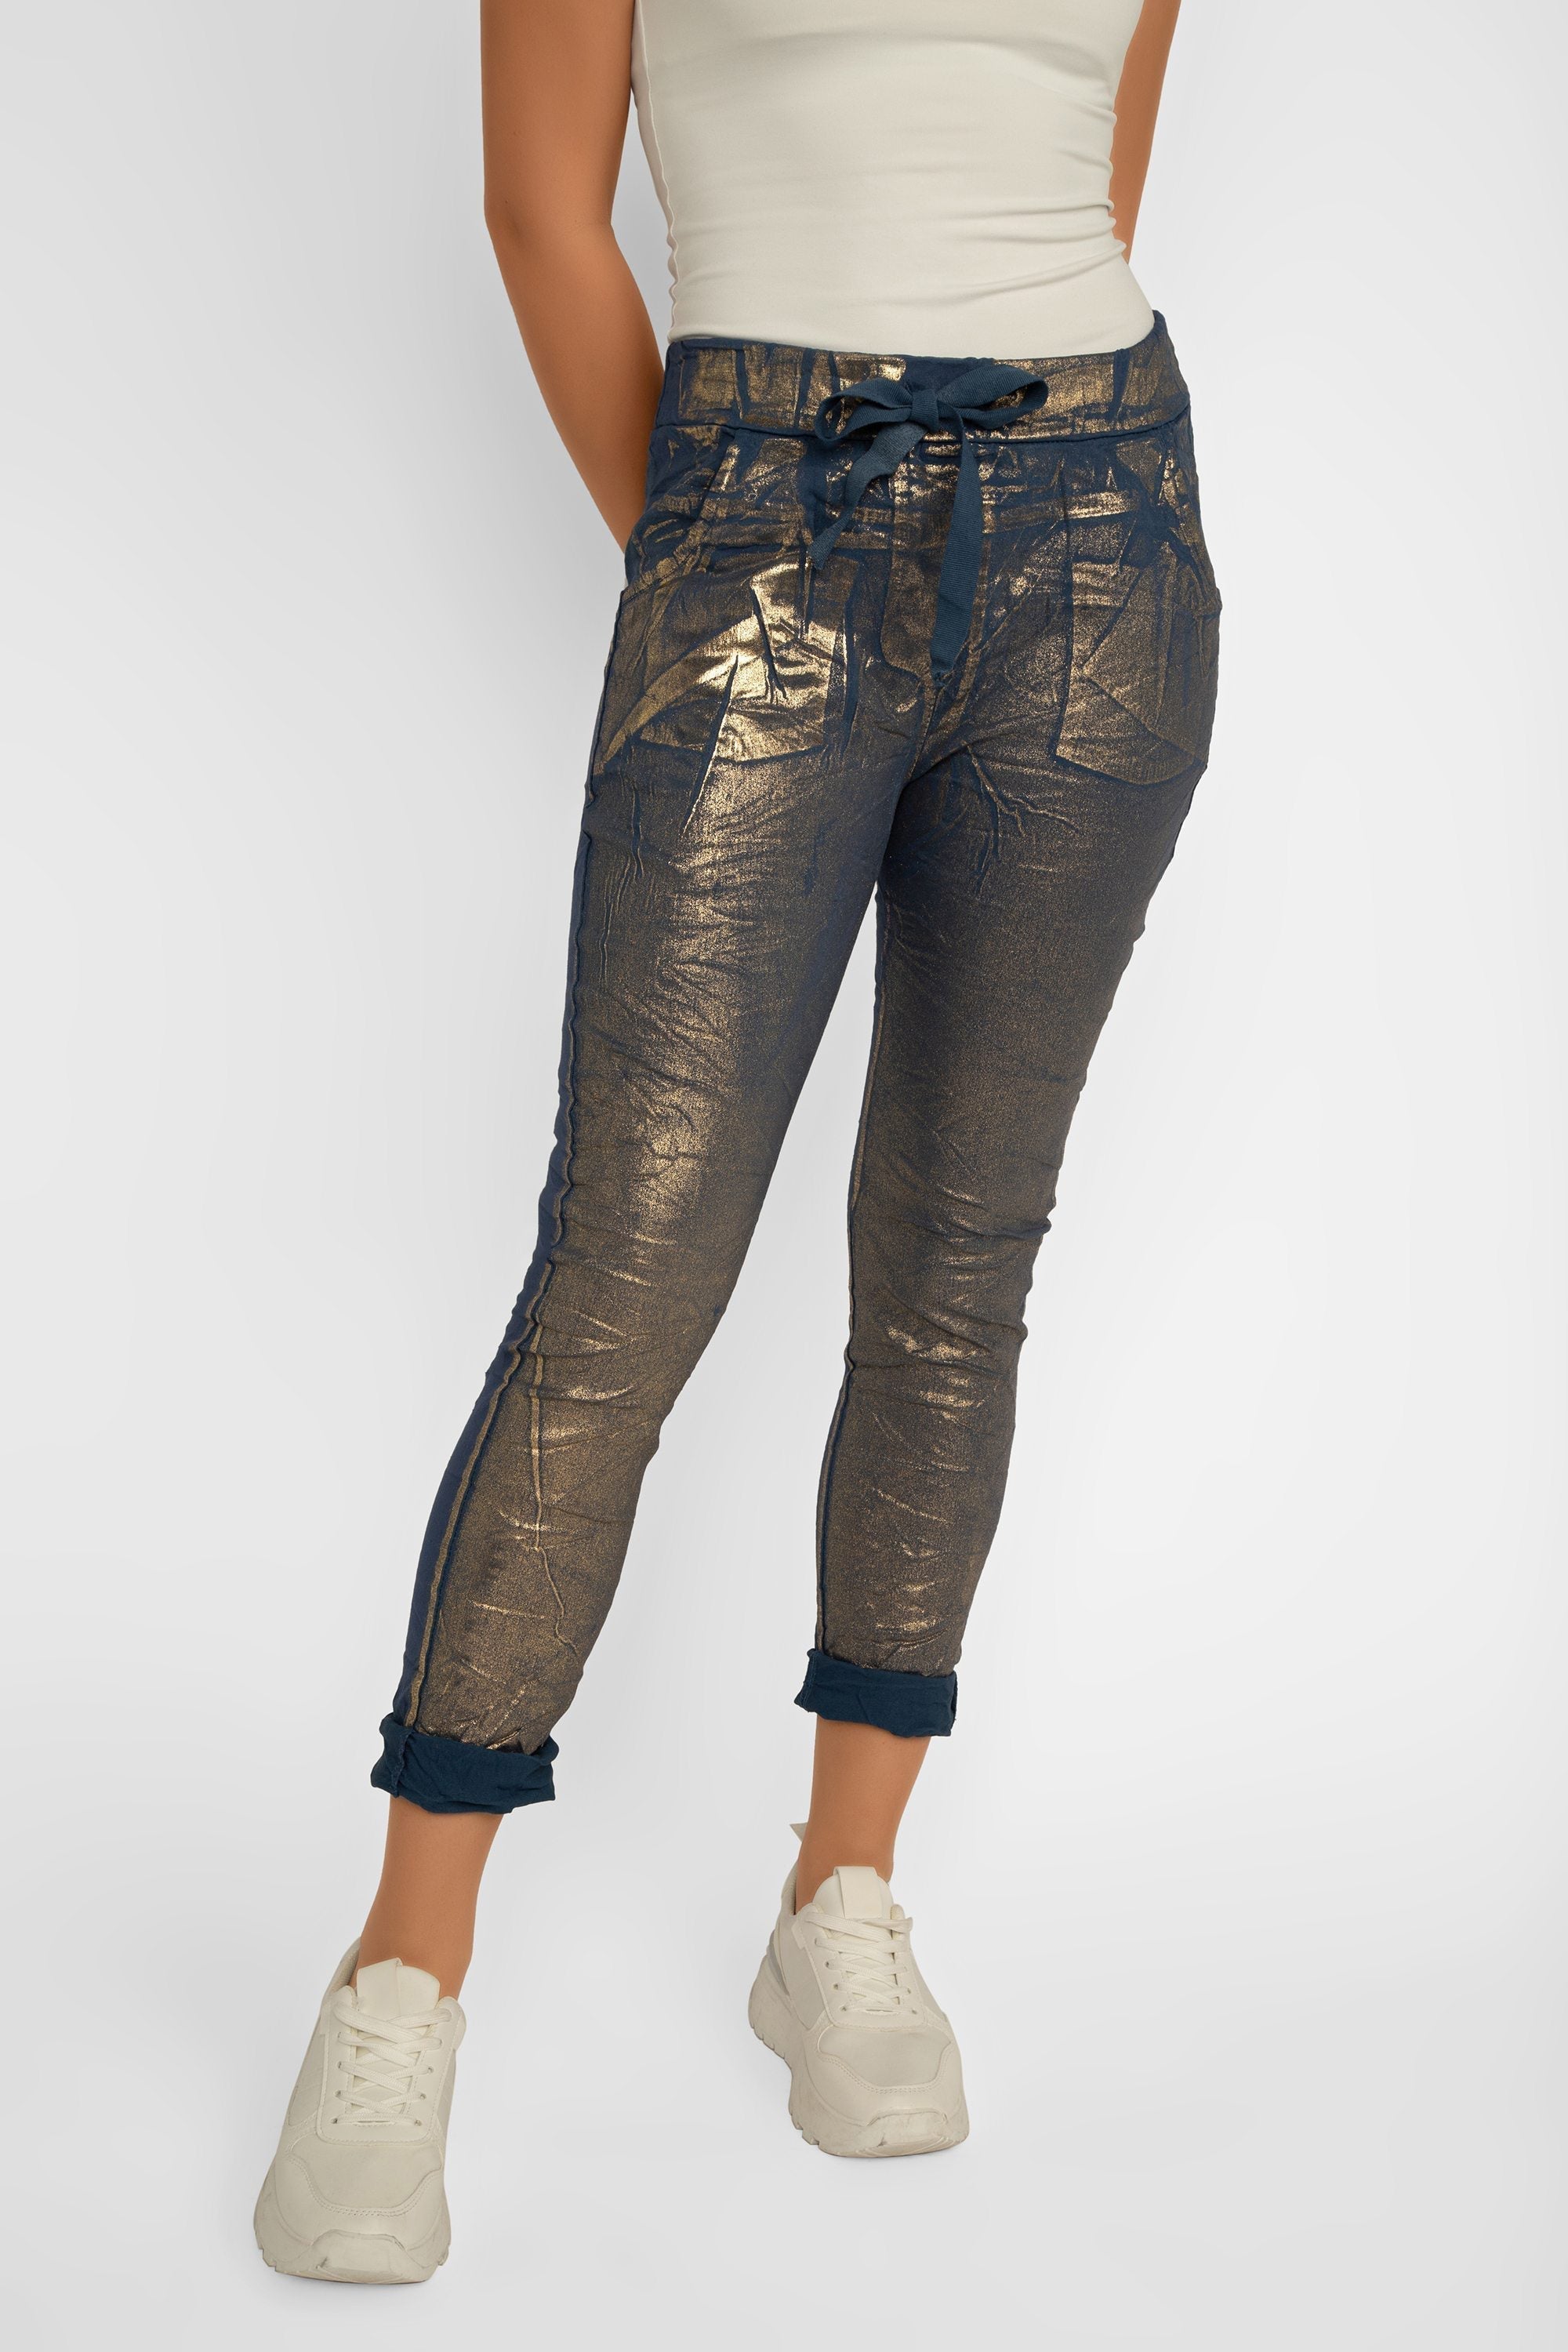 Front view of Bell Amore (21258) Women's Cropped Slim Fit, Metallic Coated Pull On Pants with Pockets in Navy Blue with Gold foil